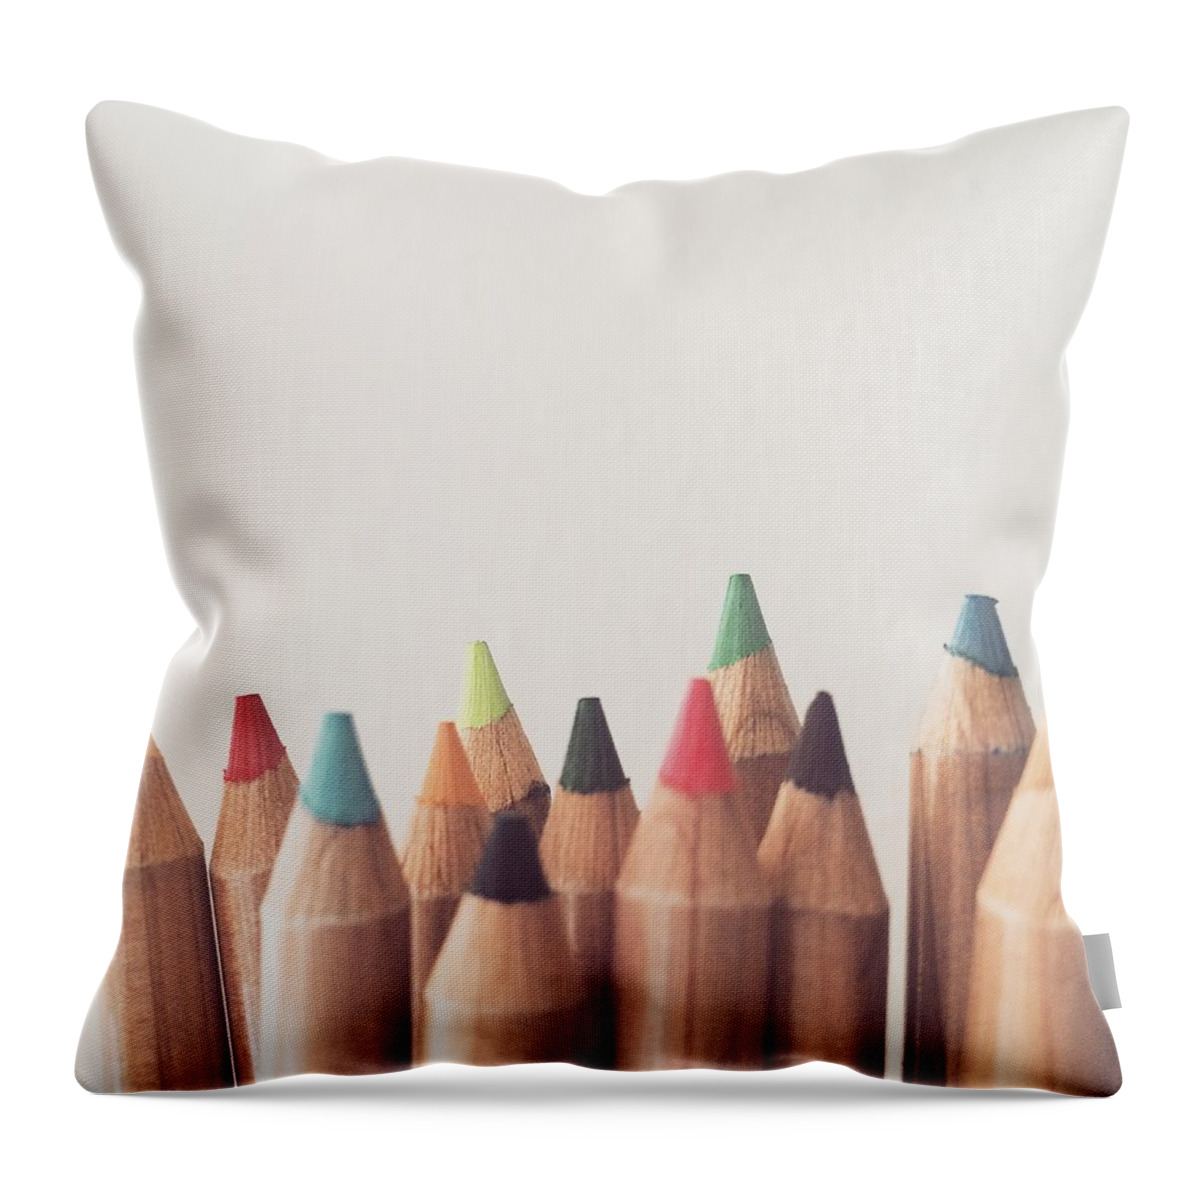 Colored Pencils Throw Pillow featuring the photograph Colored Pencils by Cortney Herron